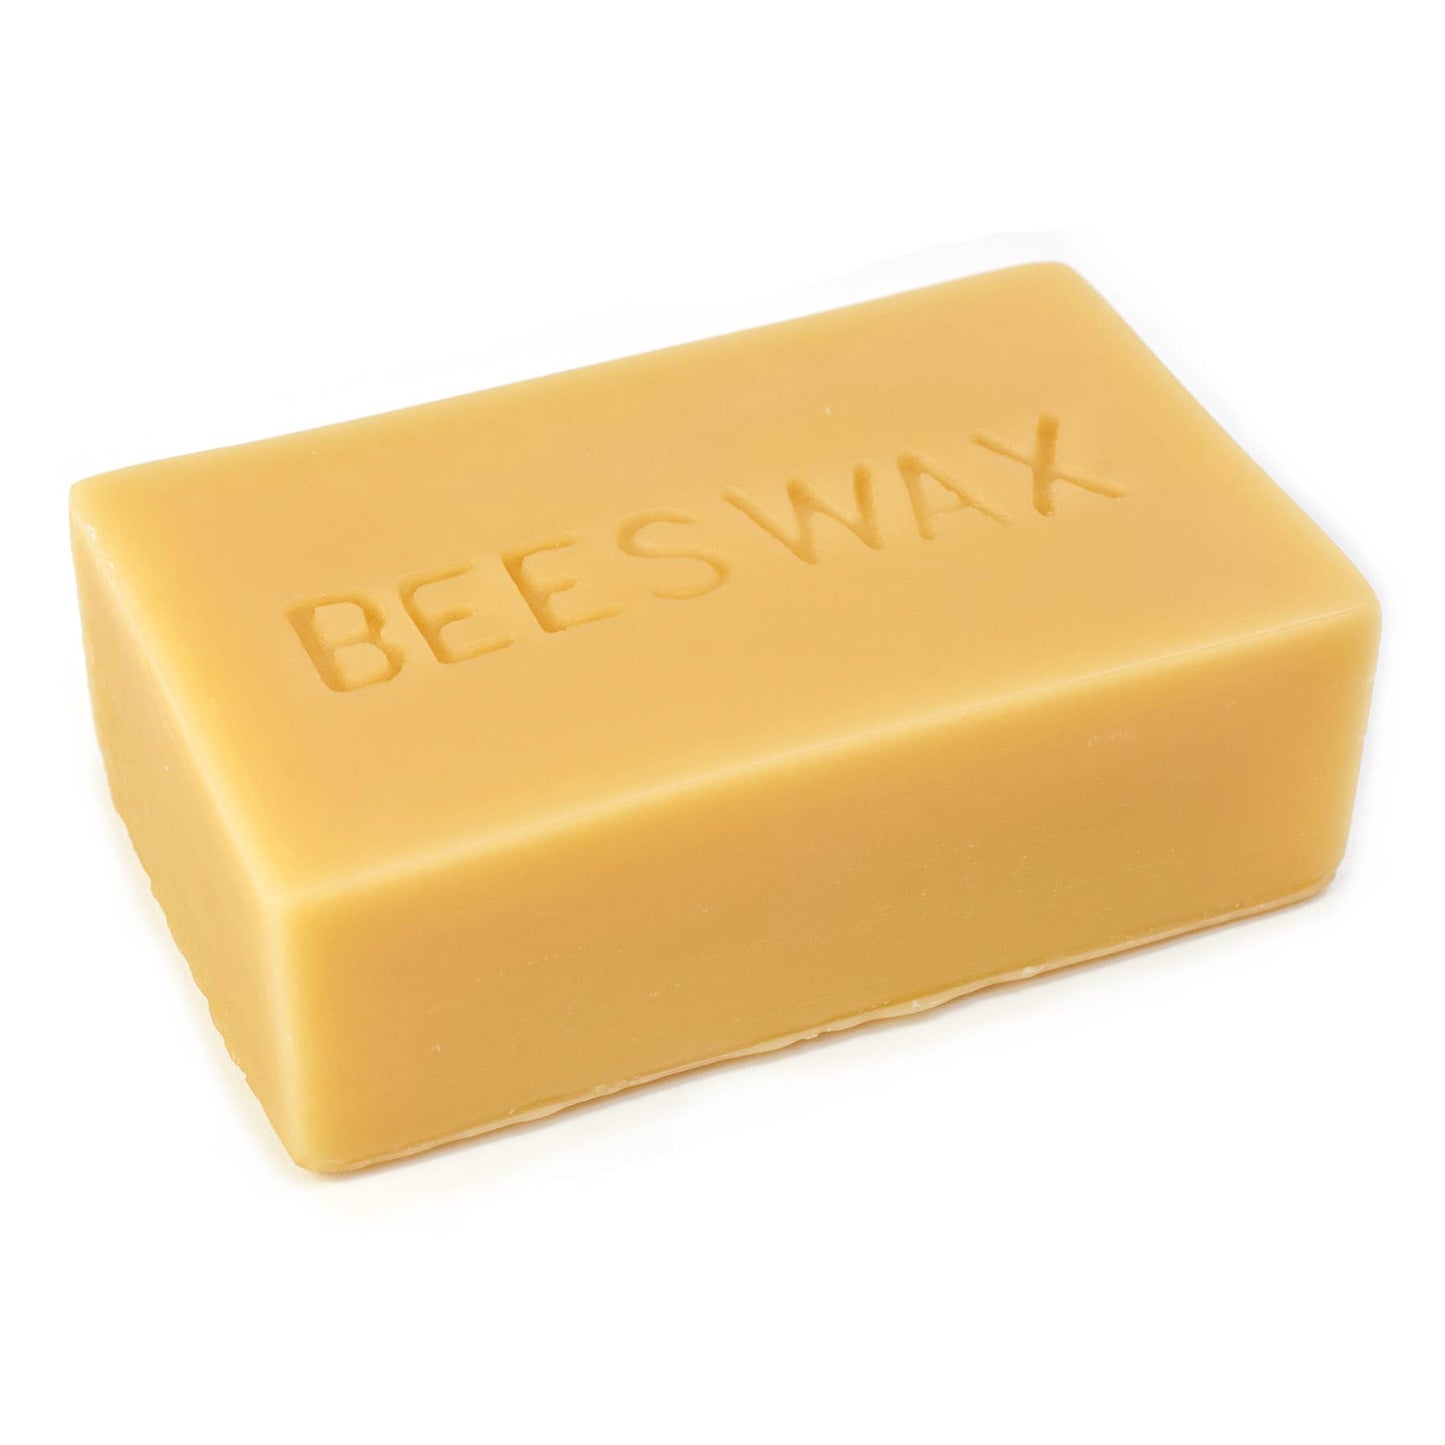 Made By Bees Limited - Beeswax, 1lb 100% Pure Canadian Yellow Beeswax (454g)